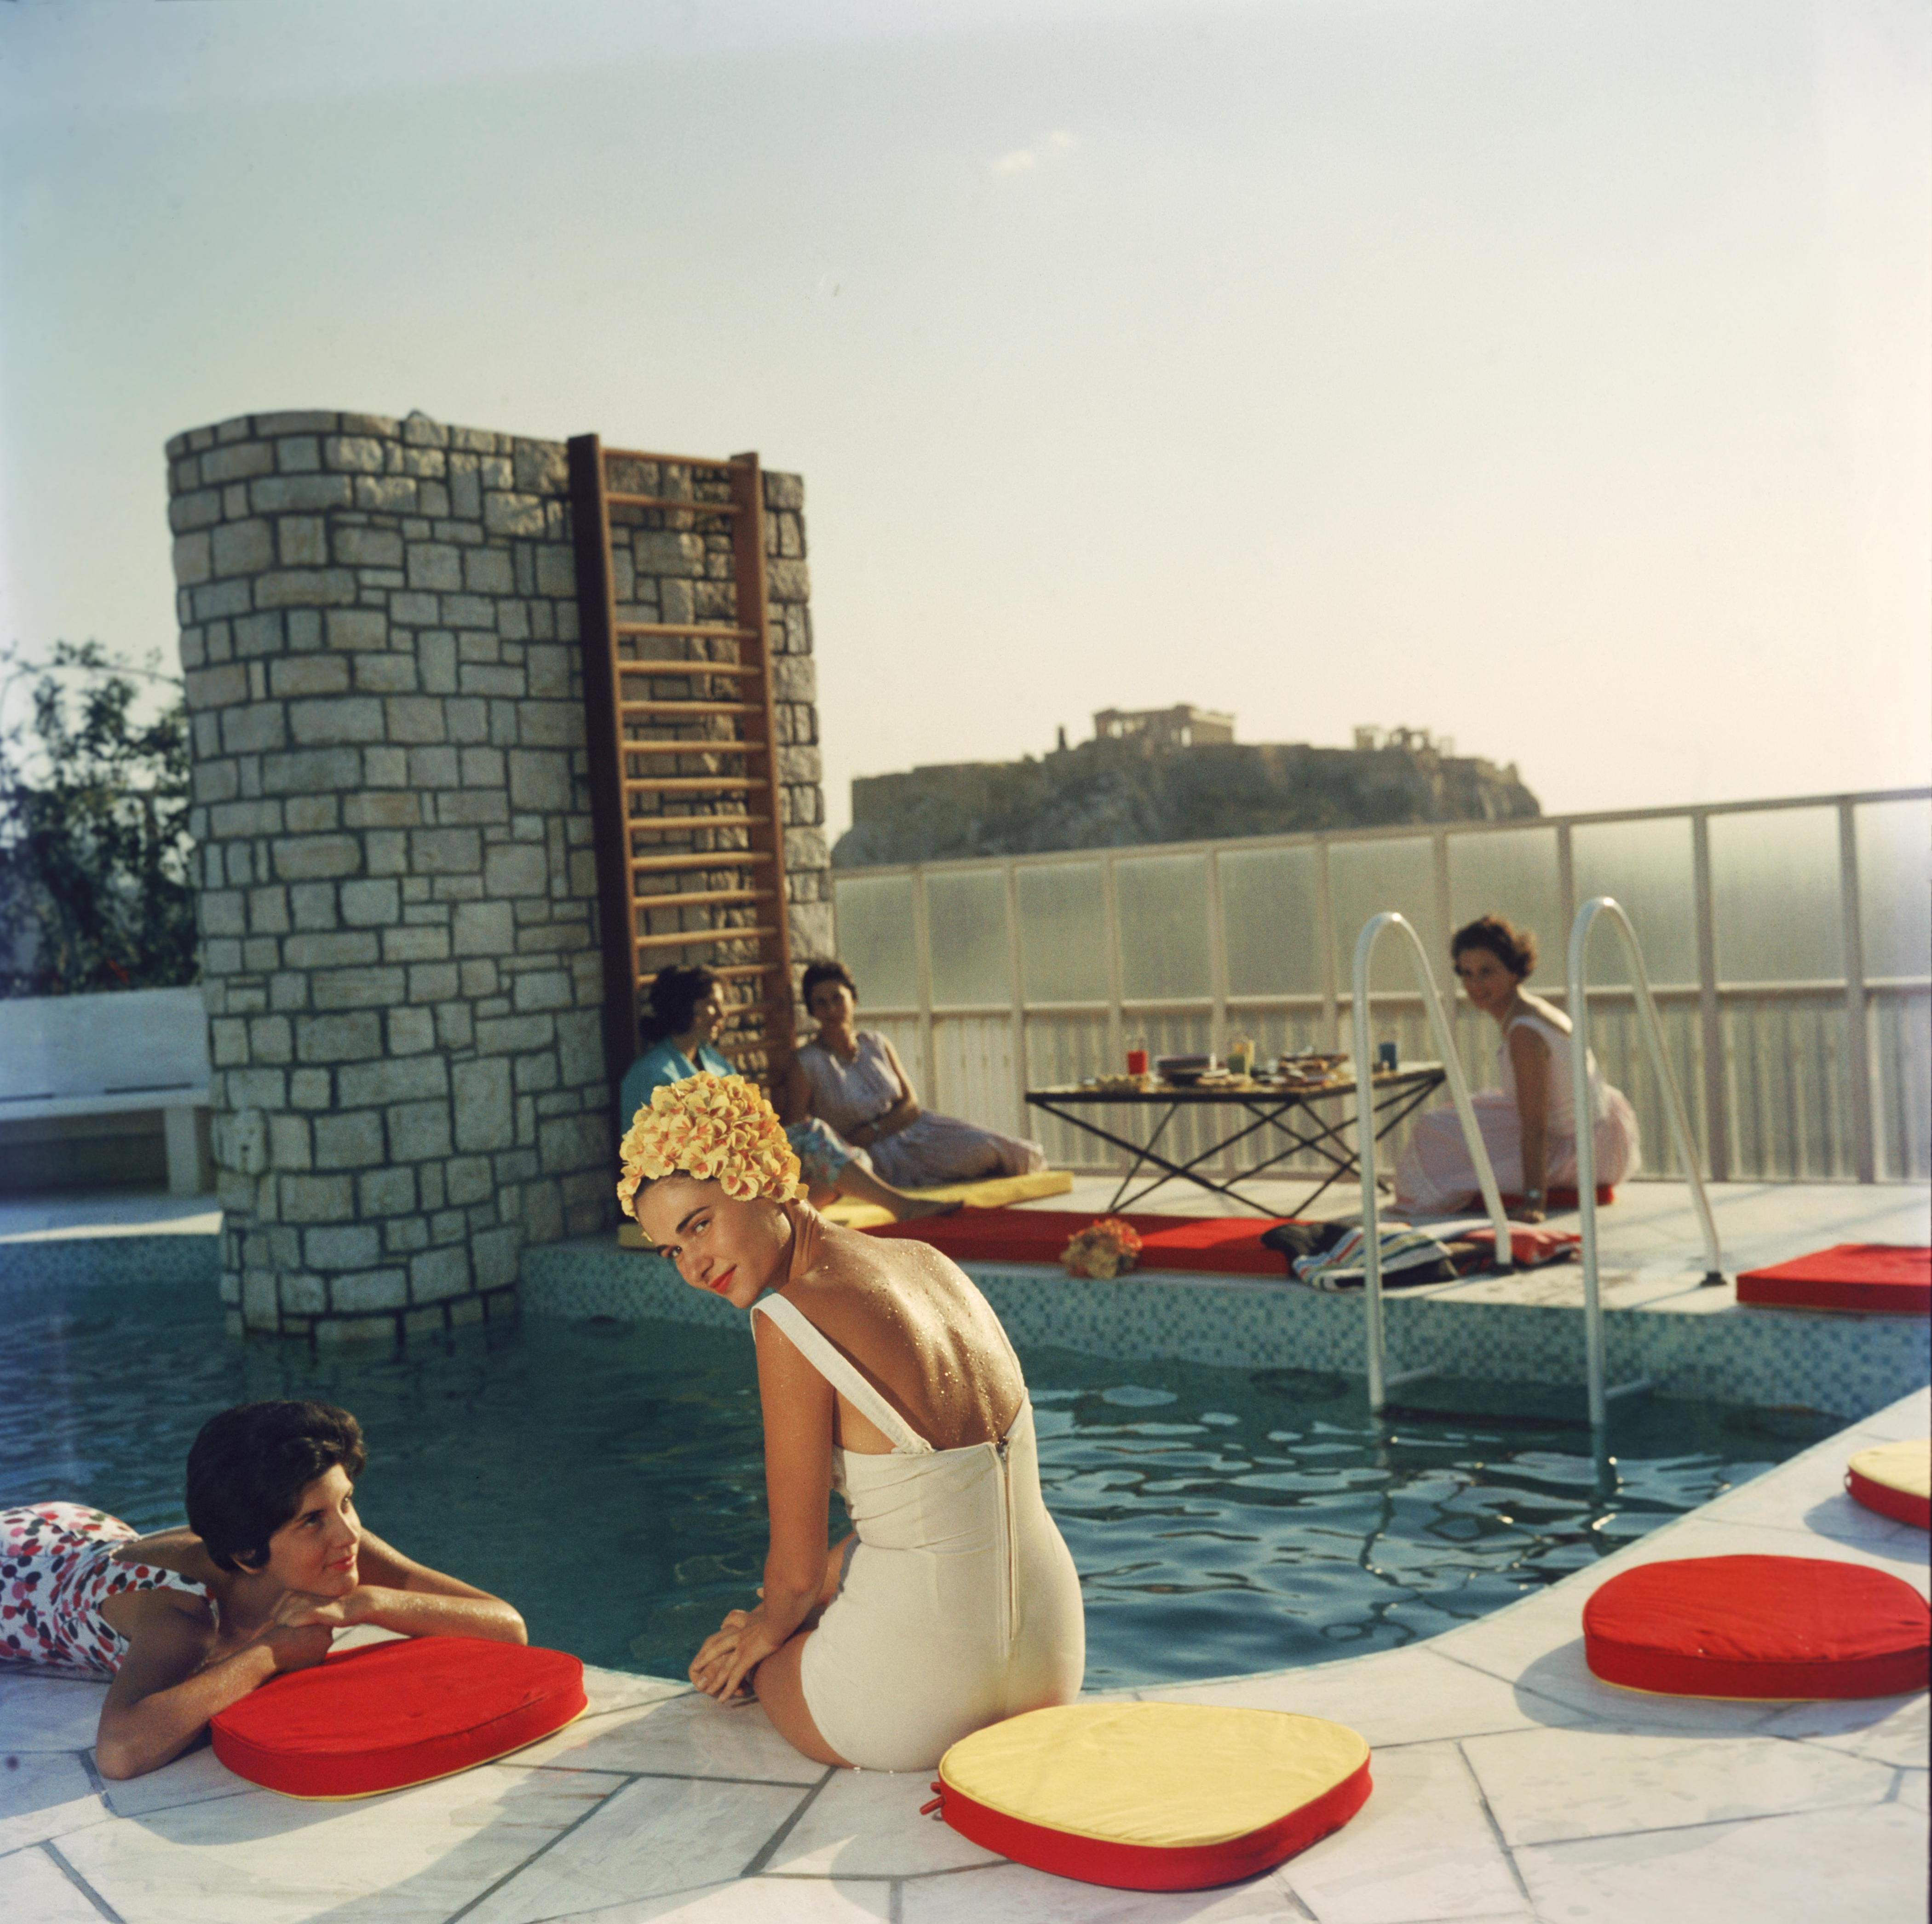 'Penthouse Pool' 1961 Slim Aarons Limited Estate Edition

Young women by the Canellopoulos penthouse pool, Athens, July 1961. 

Slim Aarons Chromogenic. C print 
Printed Later 
Slim Aarons Estate Edition 
Produced utilising the only original